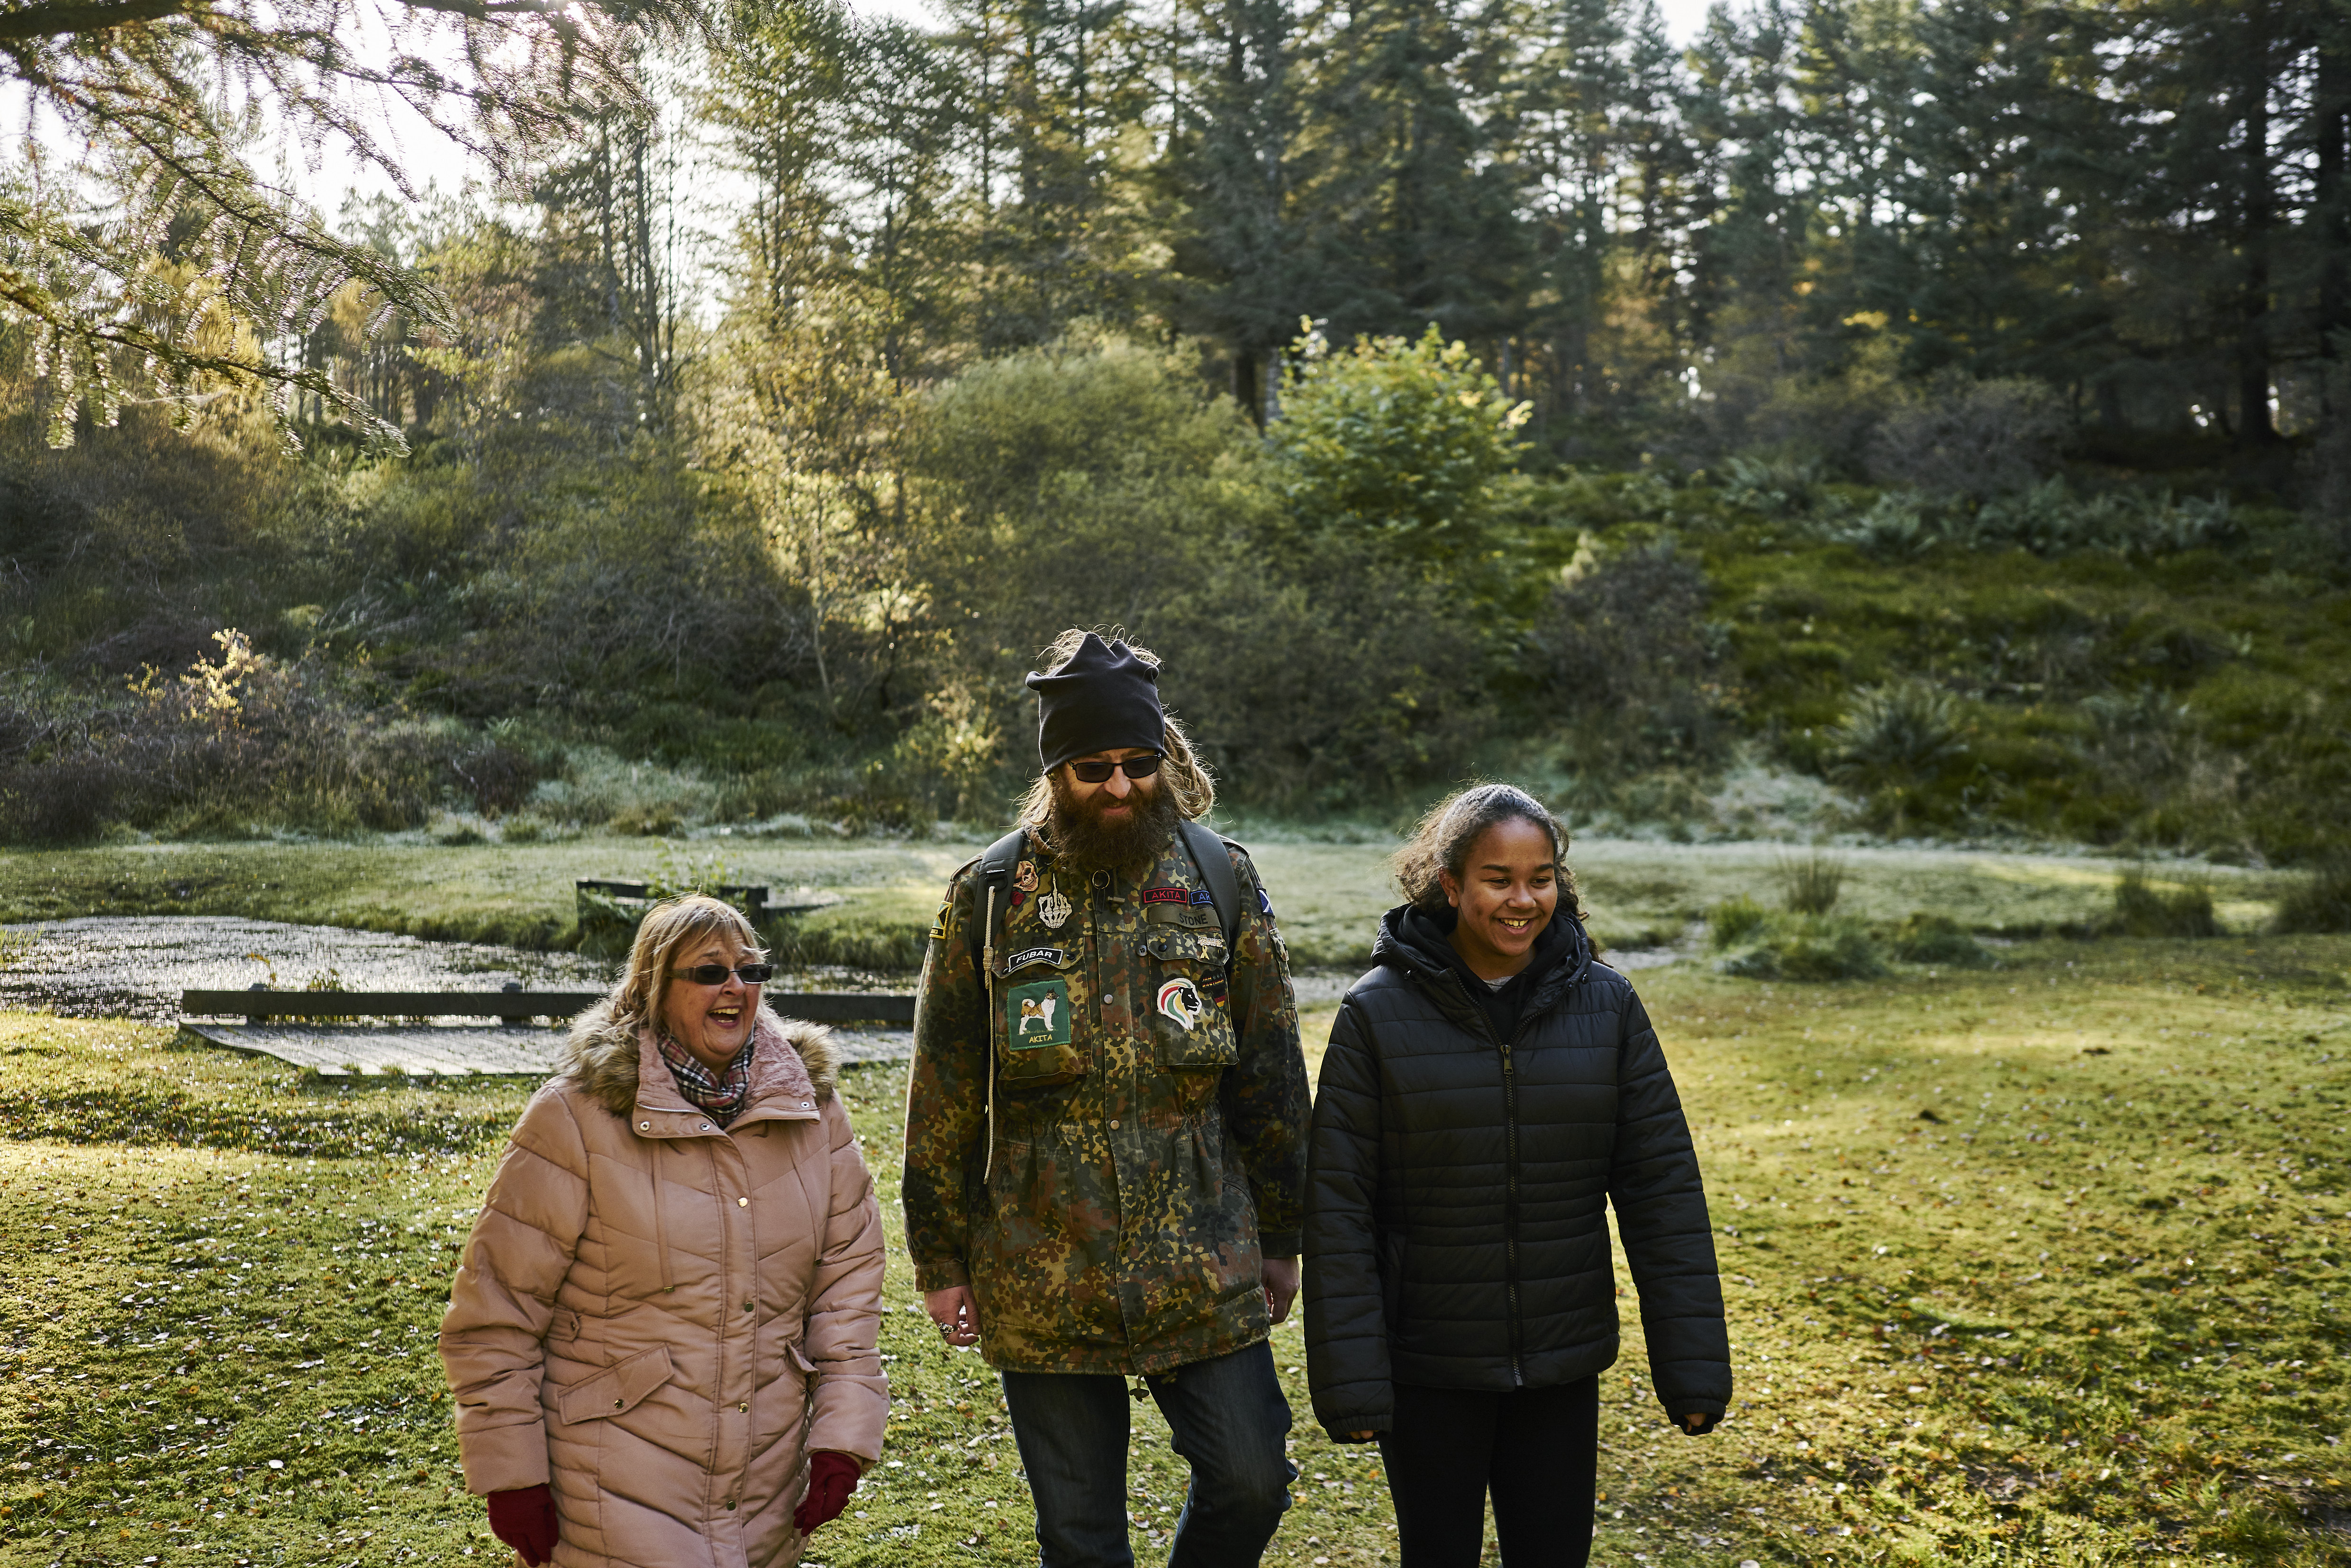 Teenage girl, man in combat jacket and dreadlocks and woman walking together with pond behind them, woodland trail, Aldie Burn forest, near Tain.